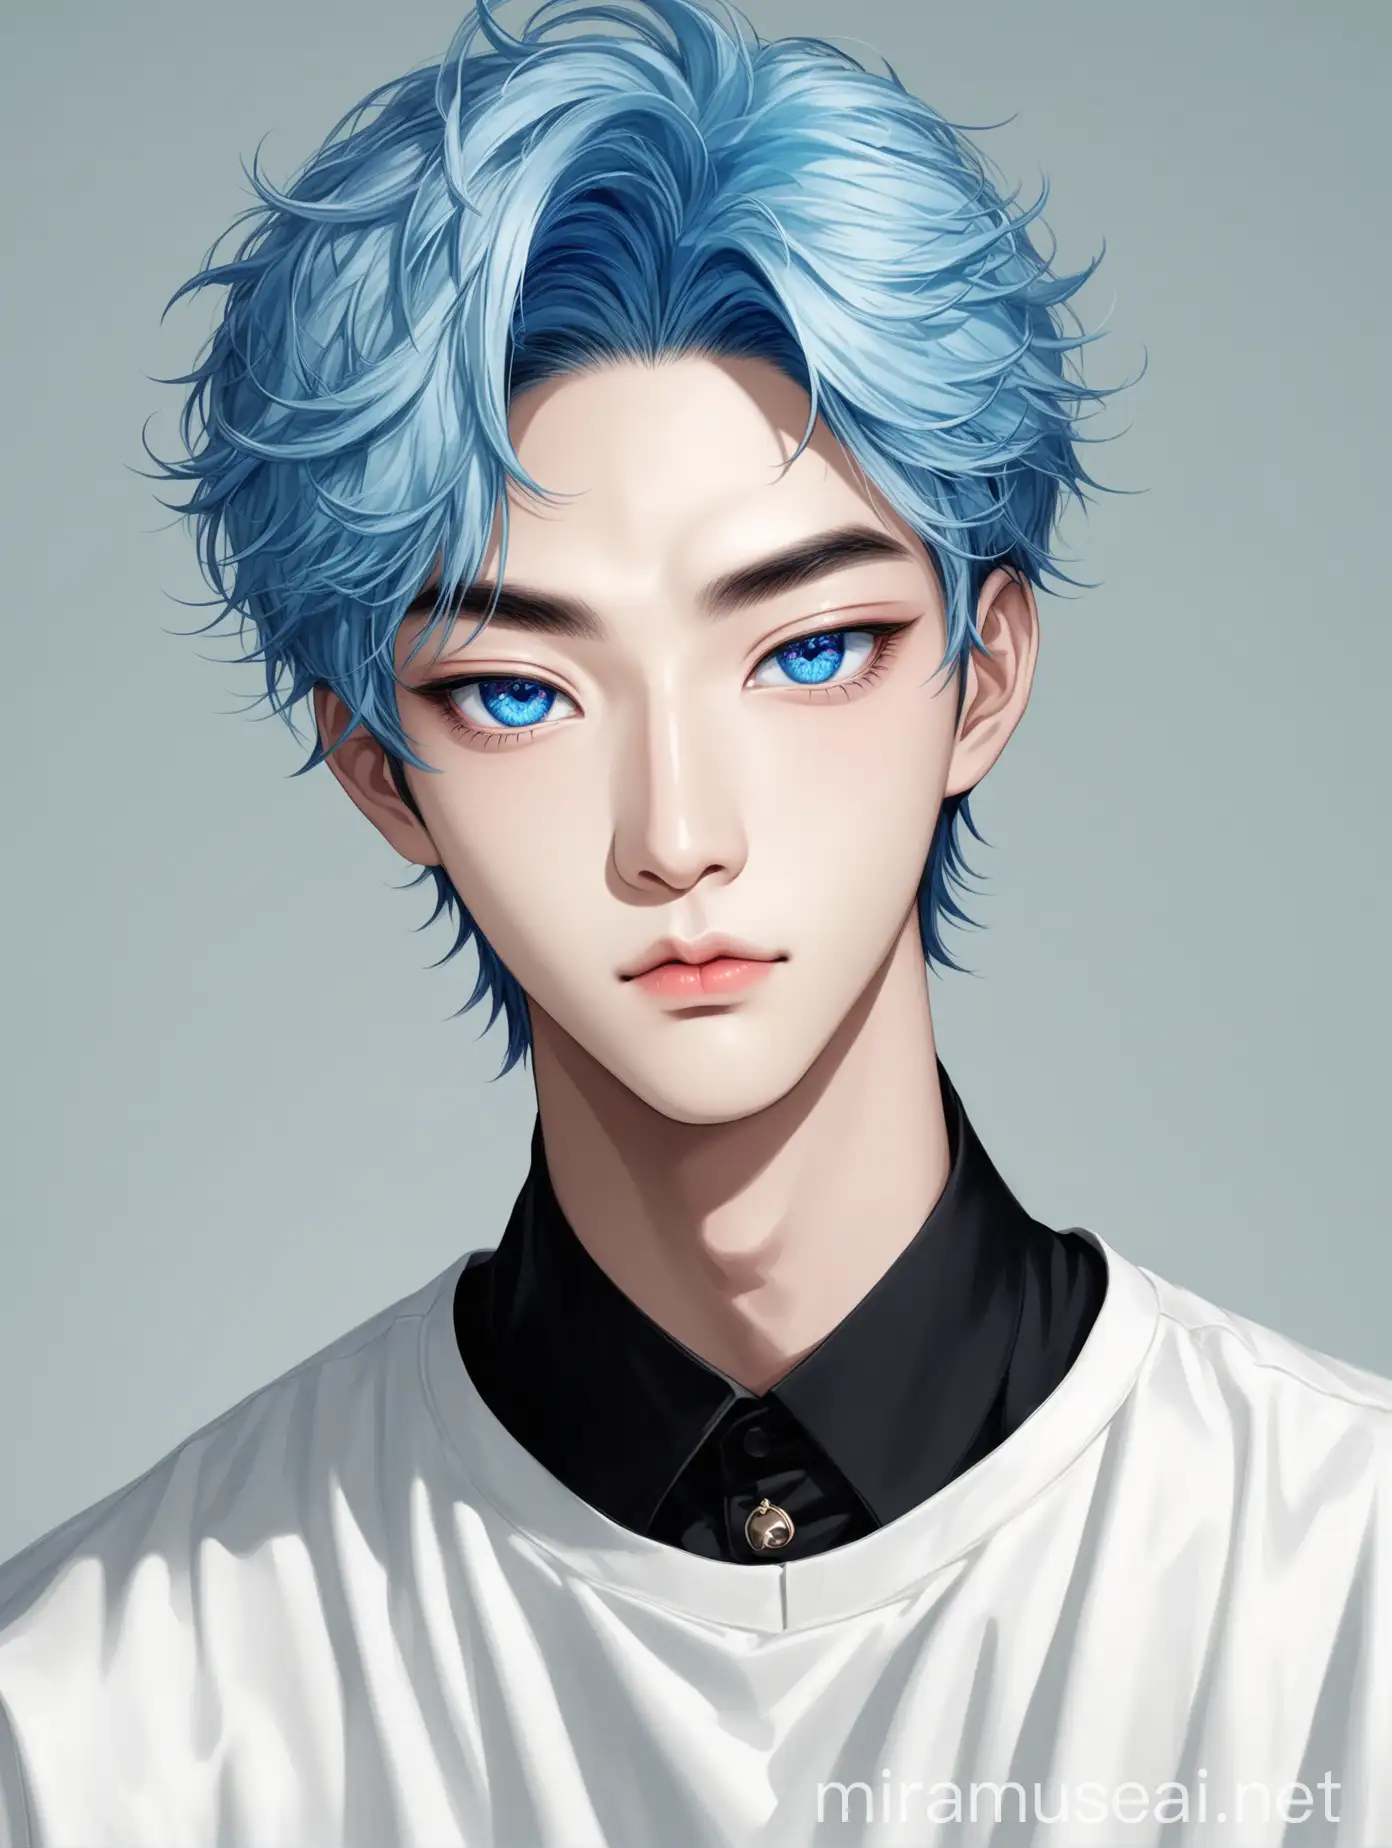 Handsome Korean Kpop Male Idol with Blue Hair and Sea Blue Eyes